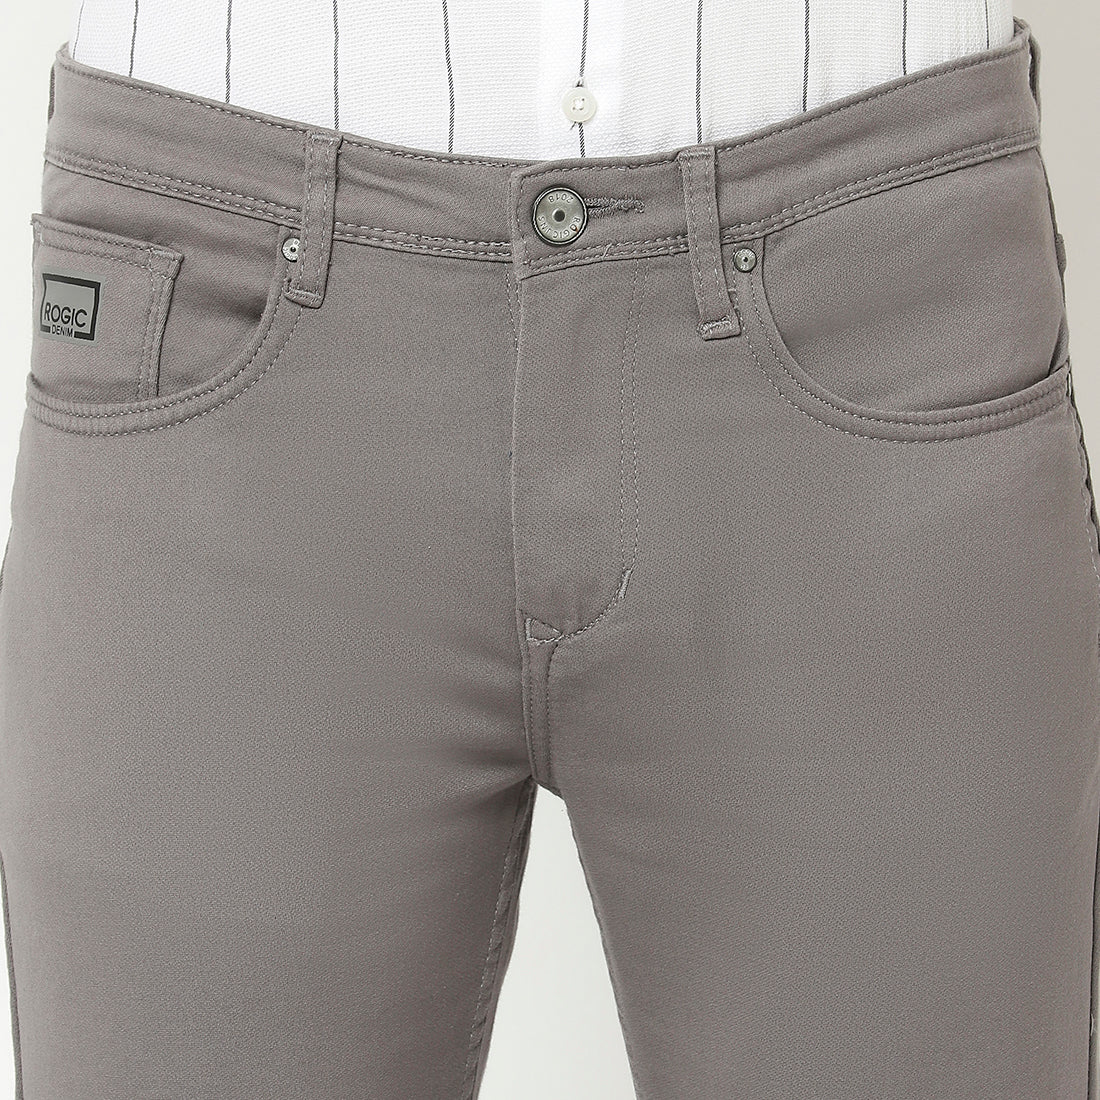 The Specter Chinos <br> in Lava Grey